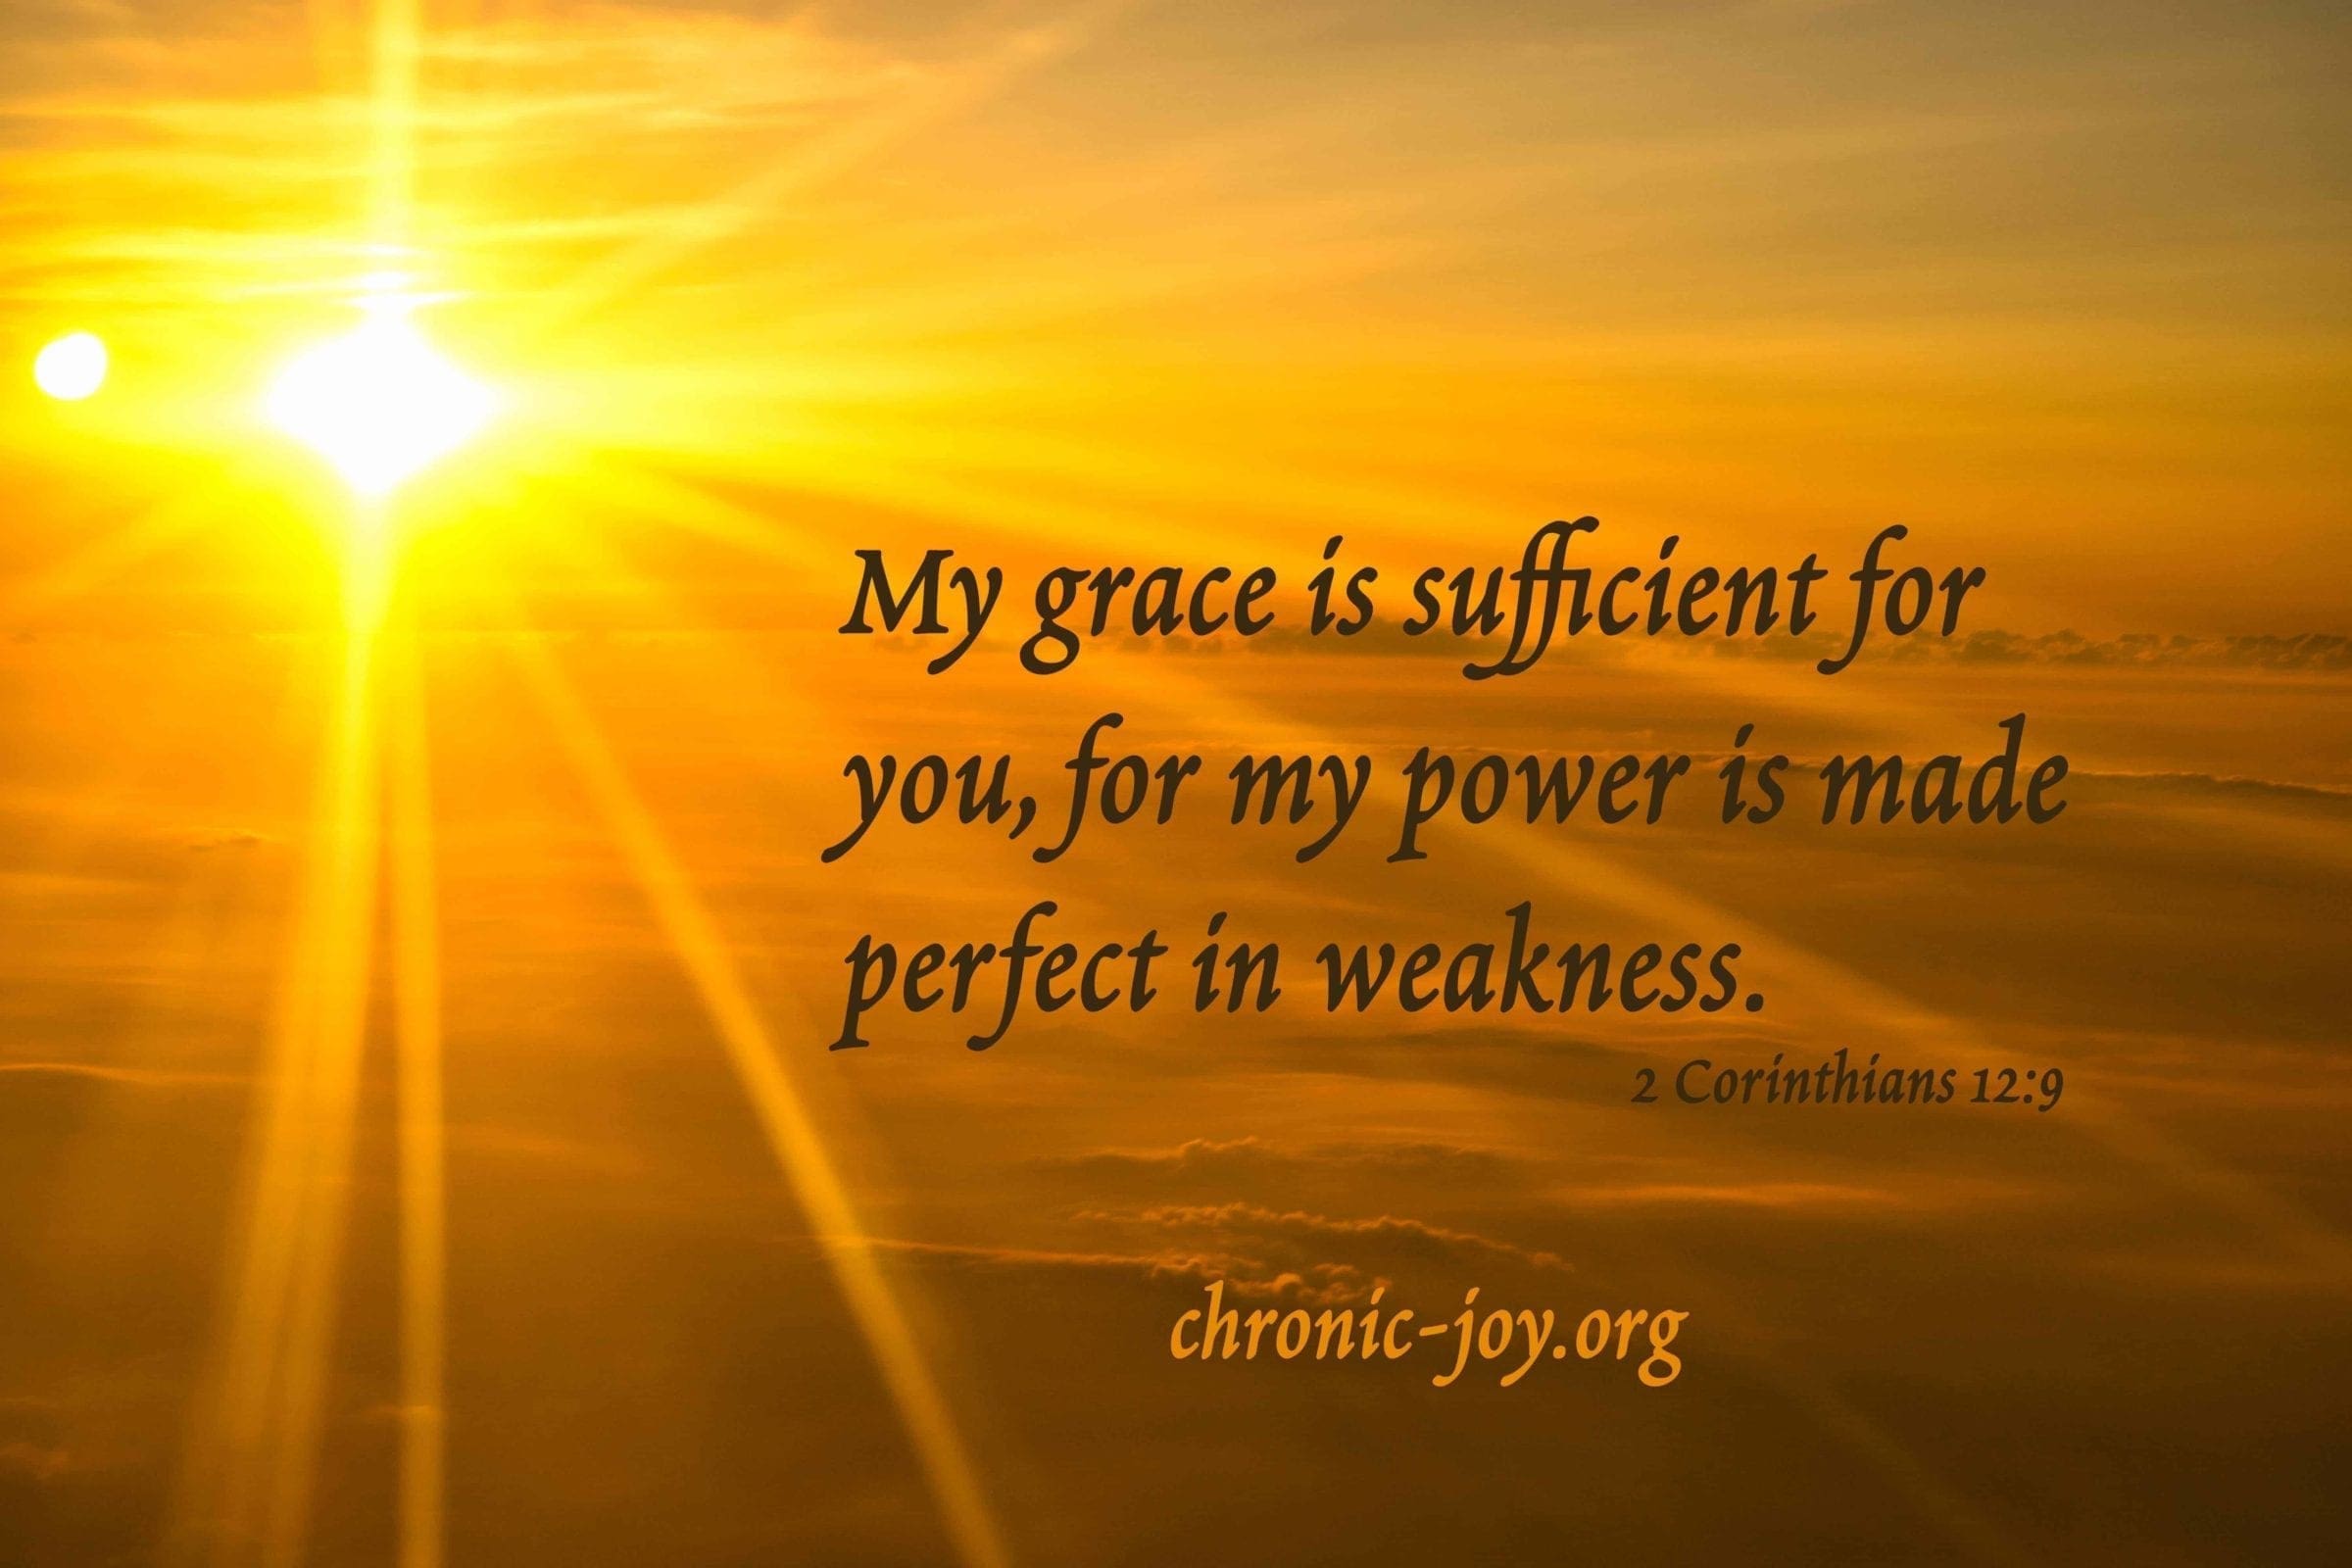 My grace is sufficient...